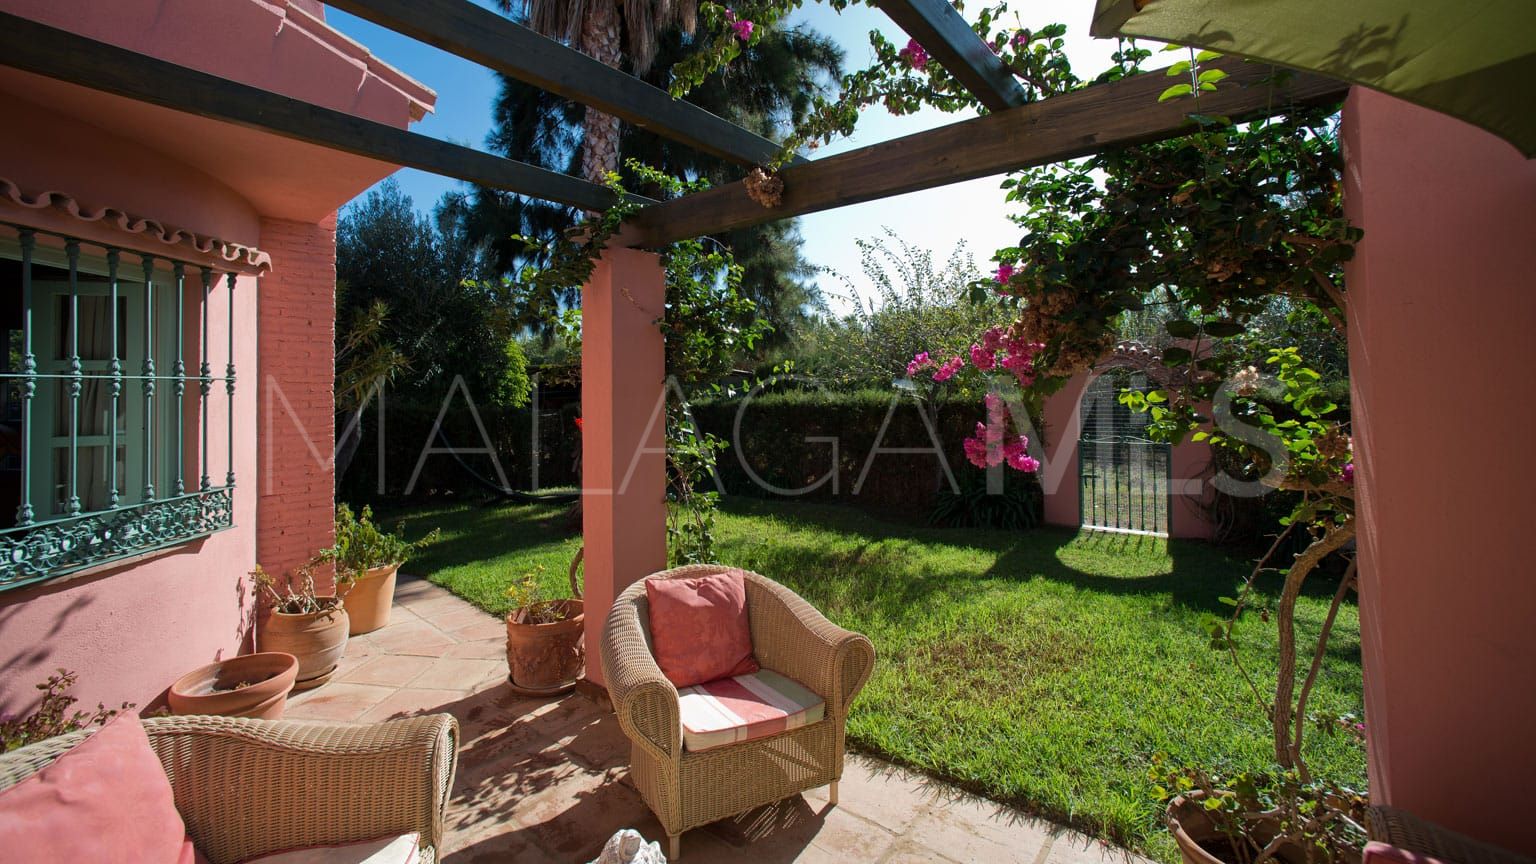 Villa for sale with 3 bedrooms in Guadalobon